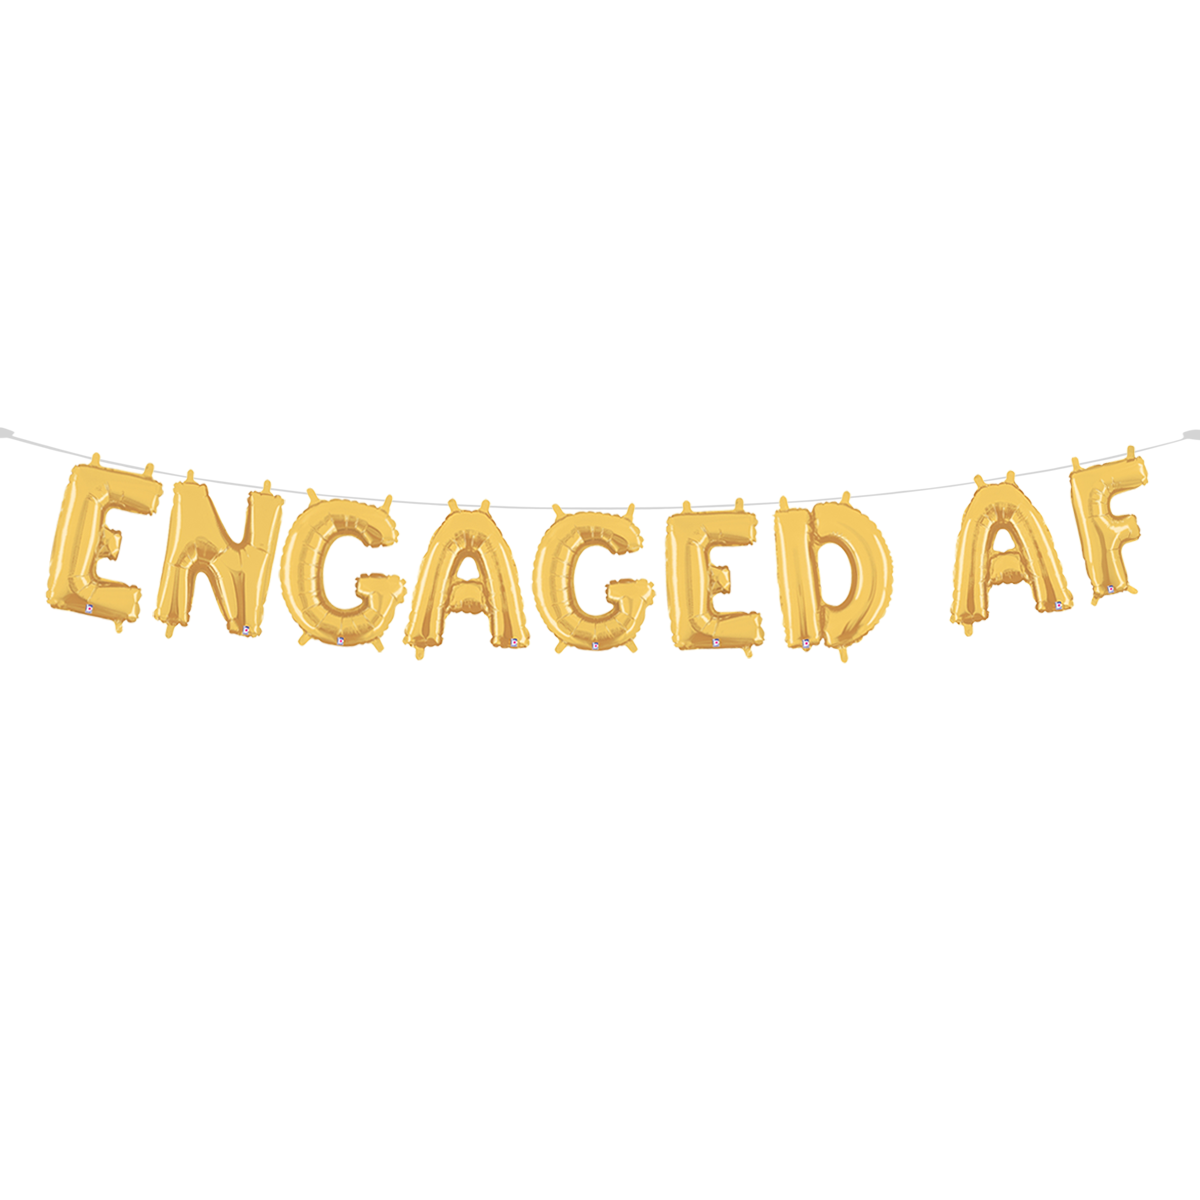 Engaged AF Gold Balloon Garland - a balloon garland made of gold colored balloons spelling out the phrase 'engaged AF' assembled on a line of twine and wall hung in a large radius